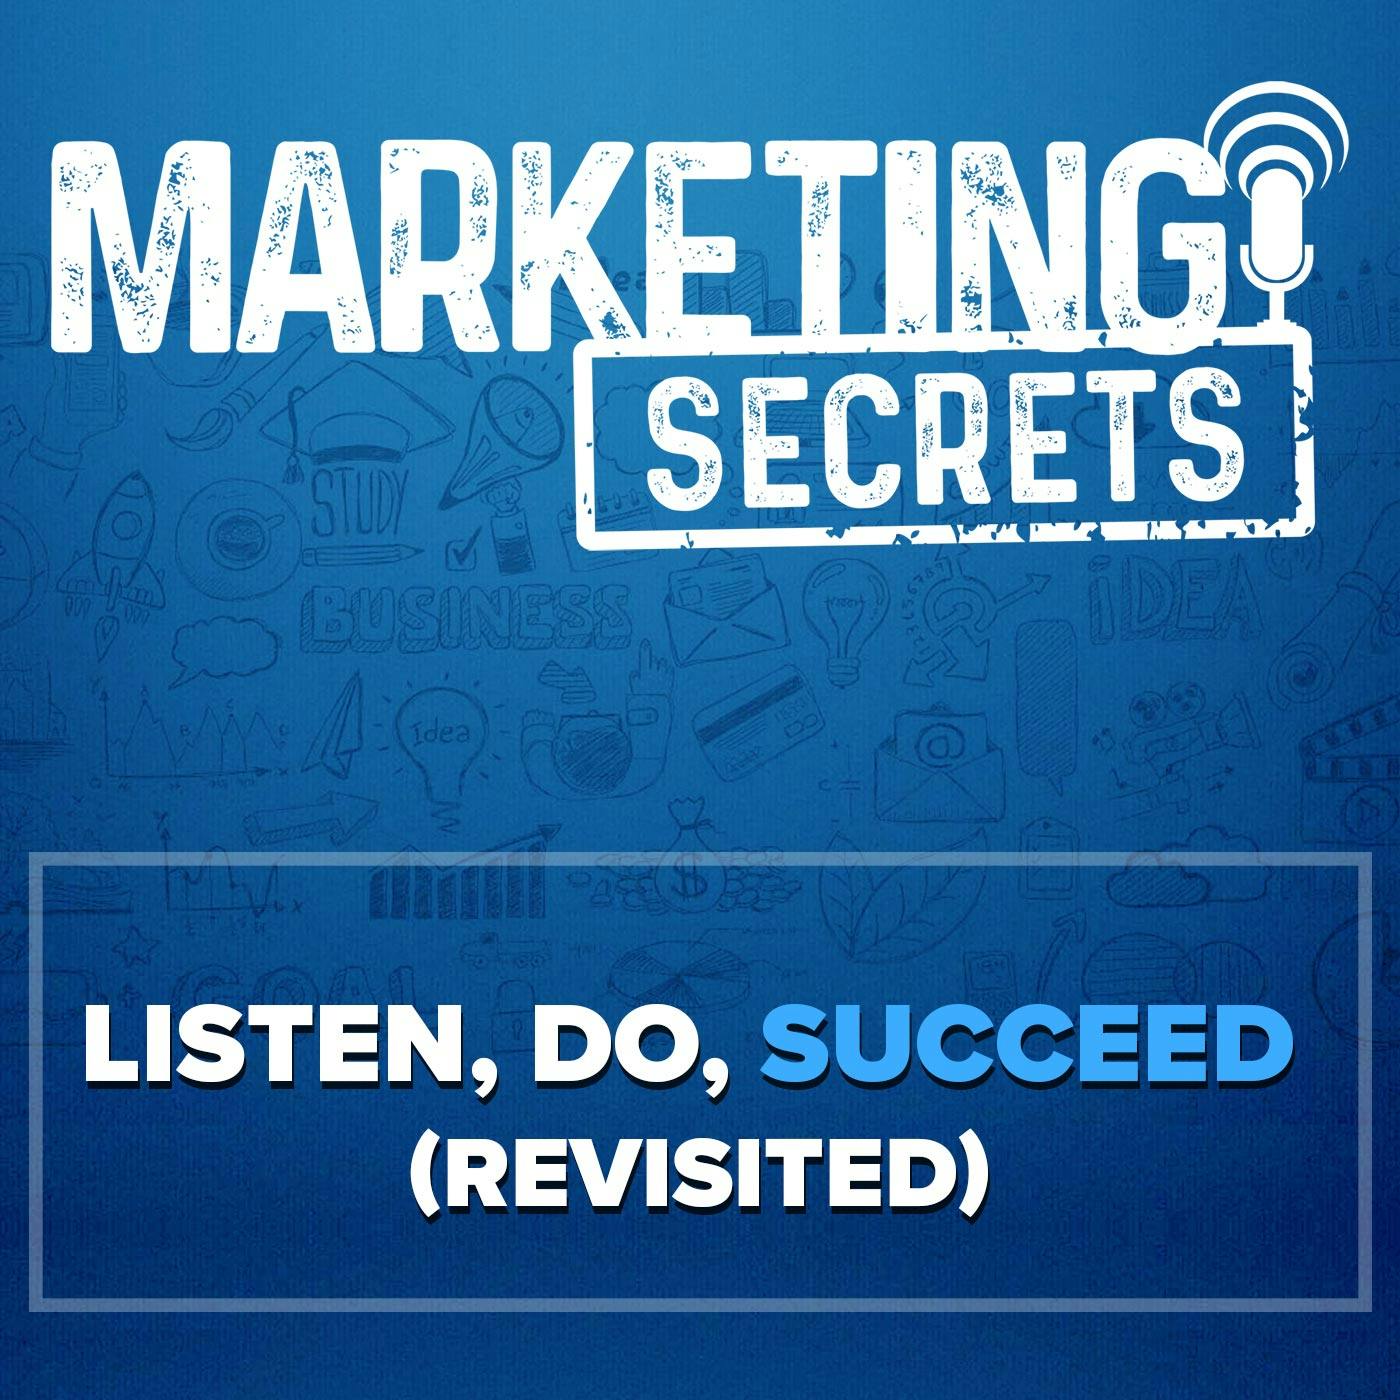 Listen, Do, Succeed (Revisited!)